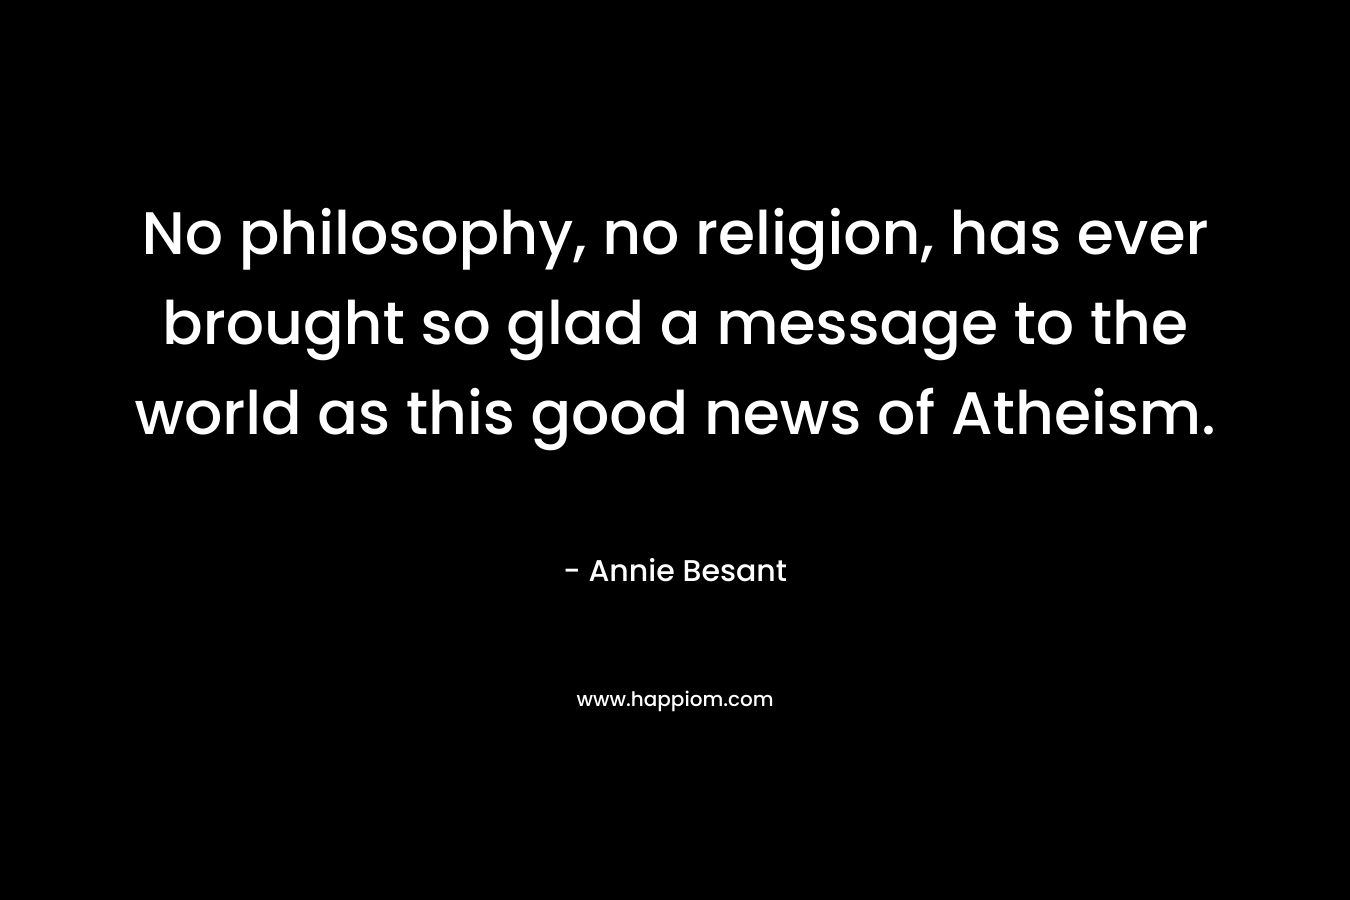 No philosophy, no religion, has ever brought so glad a message to the world as this good news of Atheism. – Annie Besant